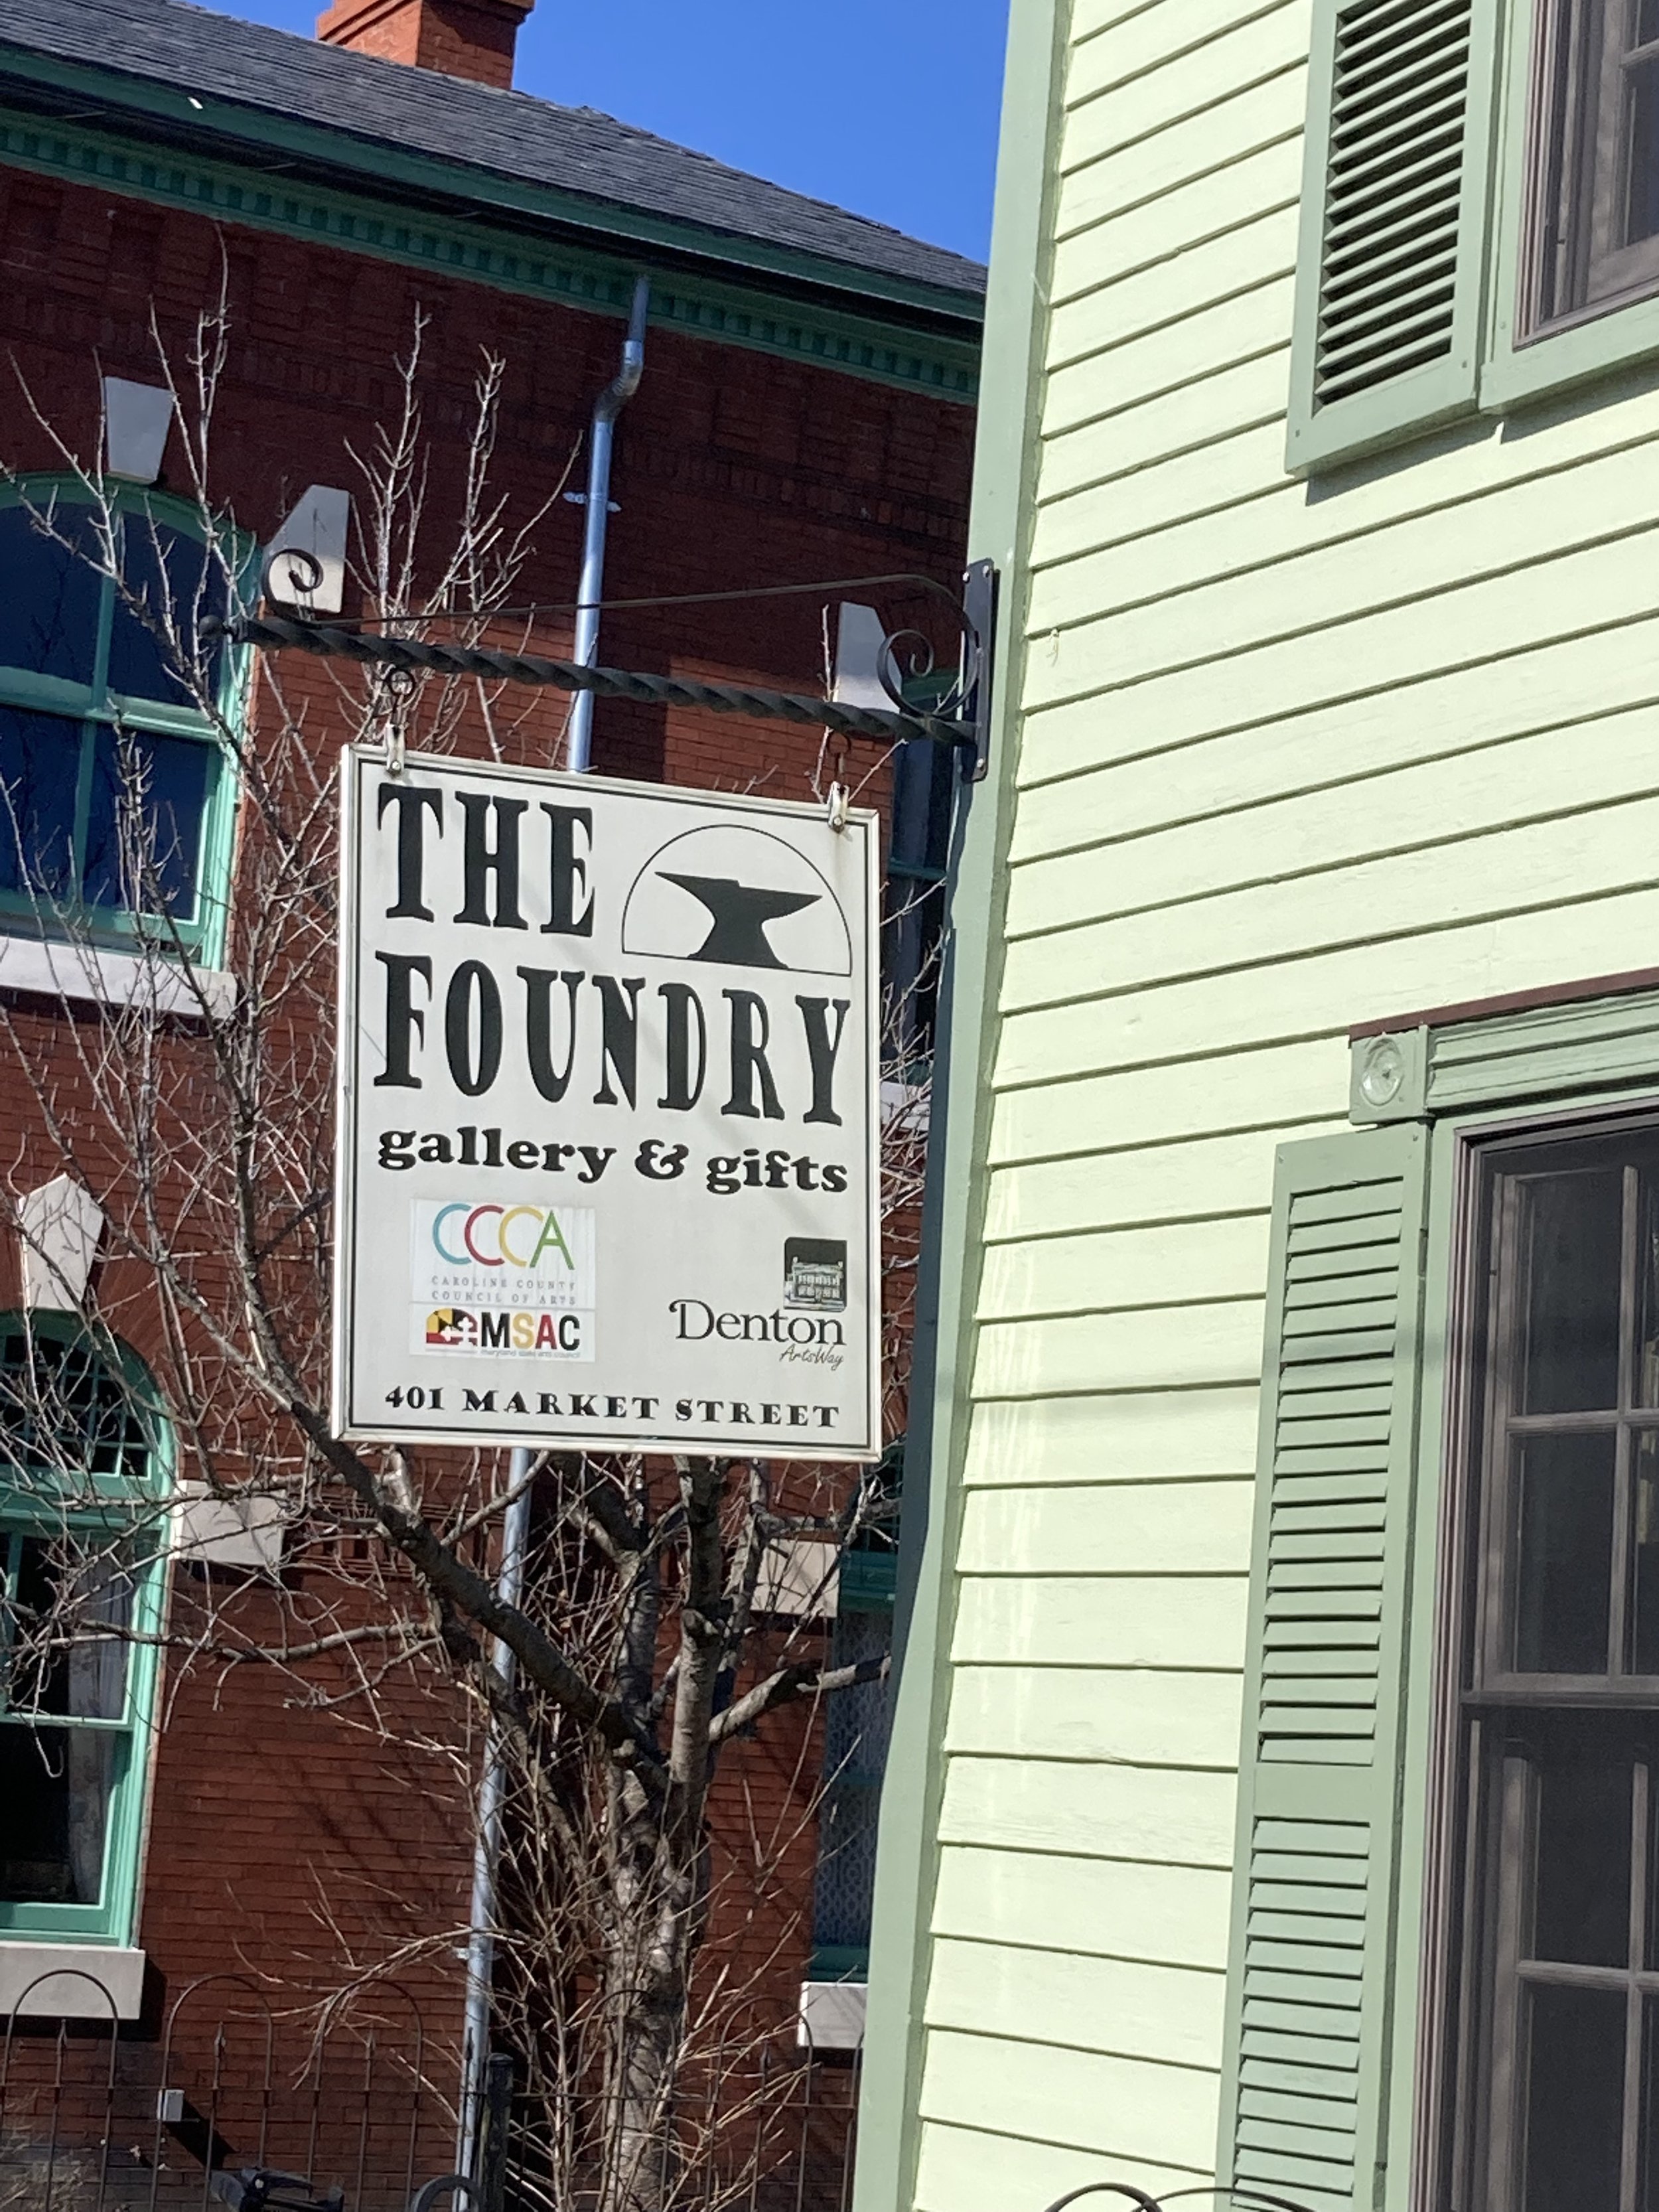 The Foundry Art Gallery in Denton, Md.